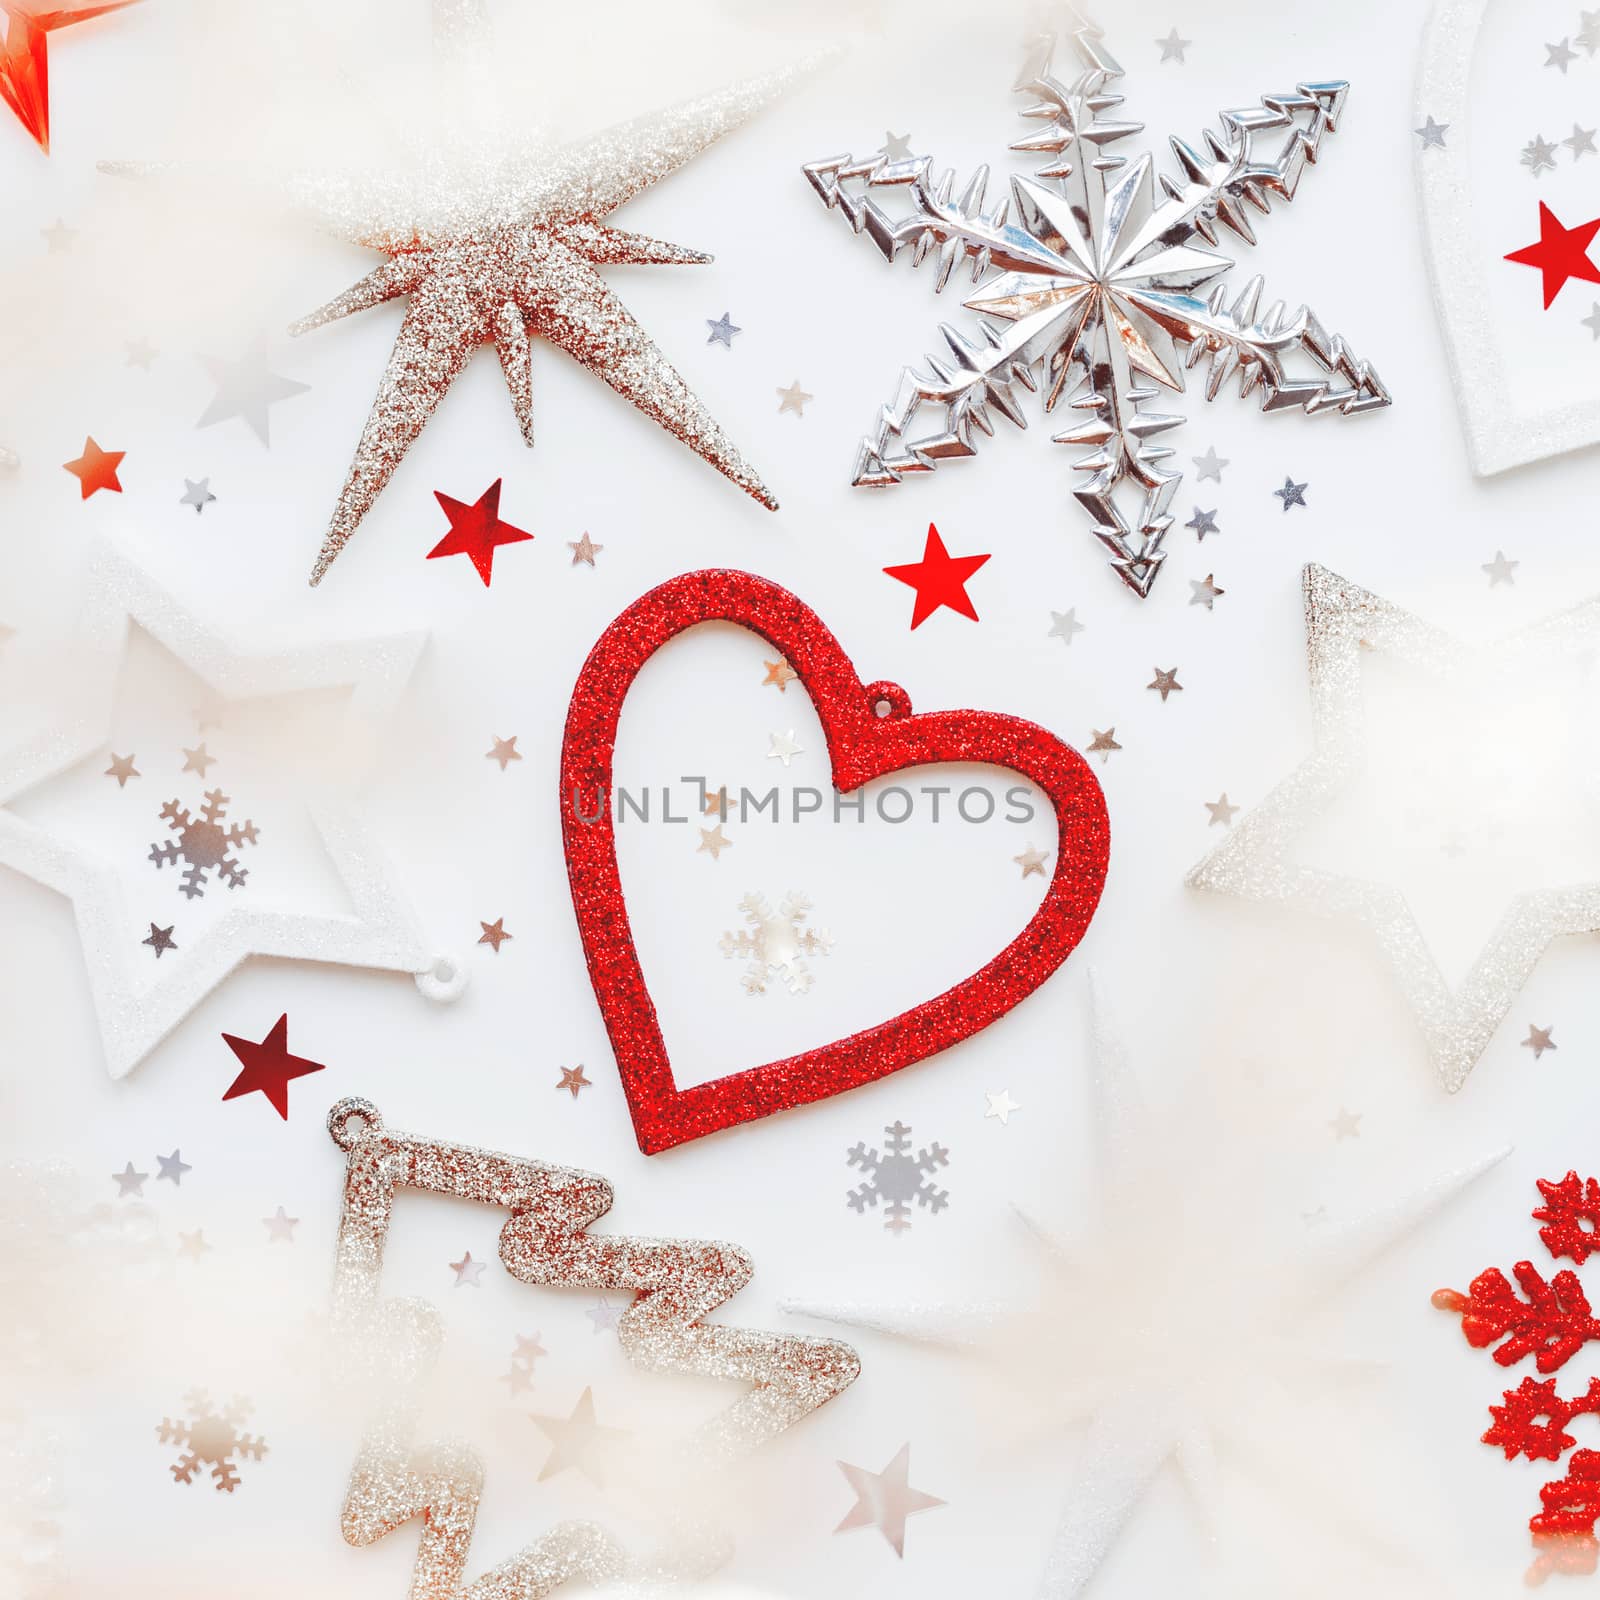 Christmas and New Year background with sparkling fir tree, heart, snowflakes and star confetti. Holiday symbols on white background with light bulbs.